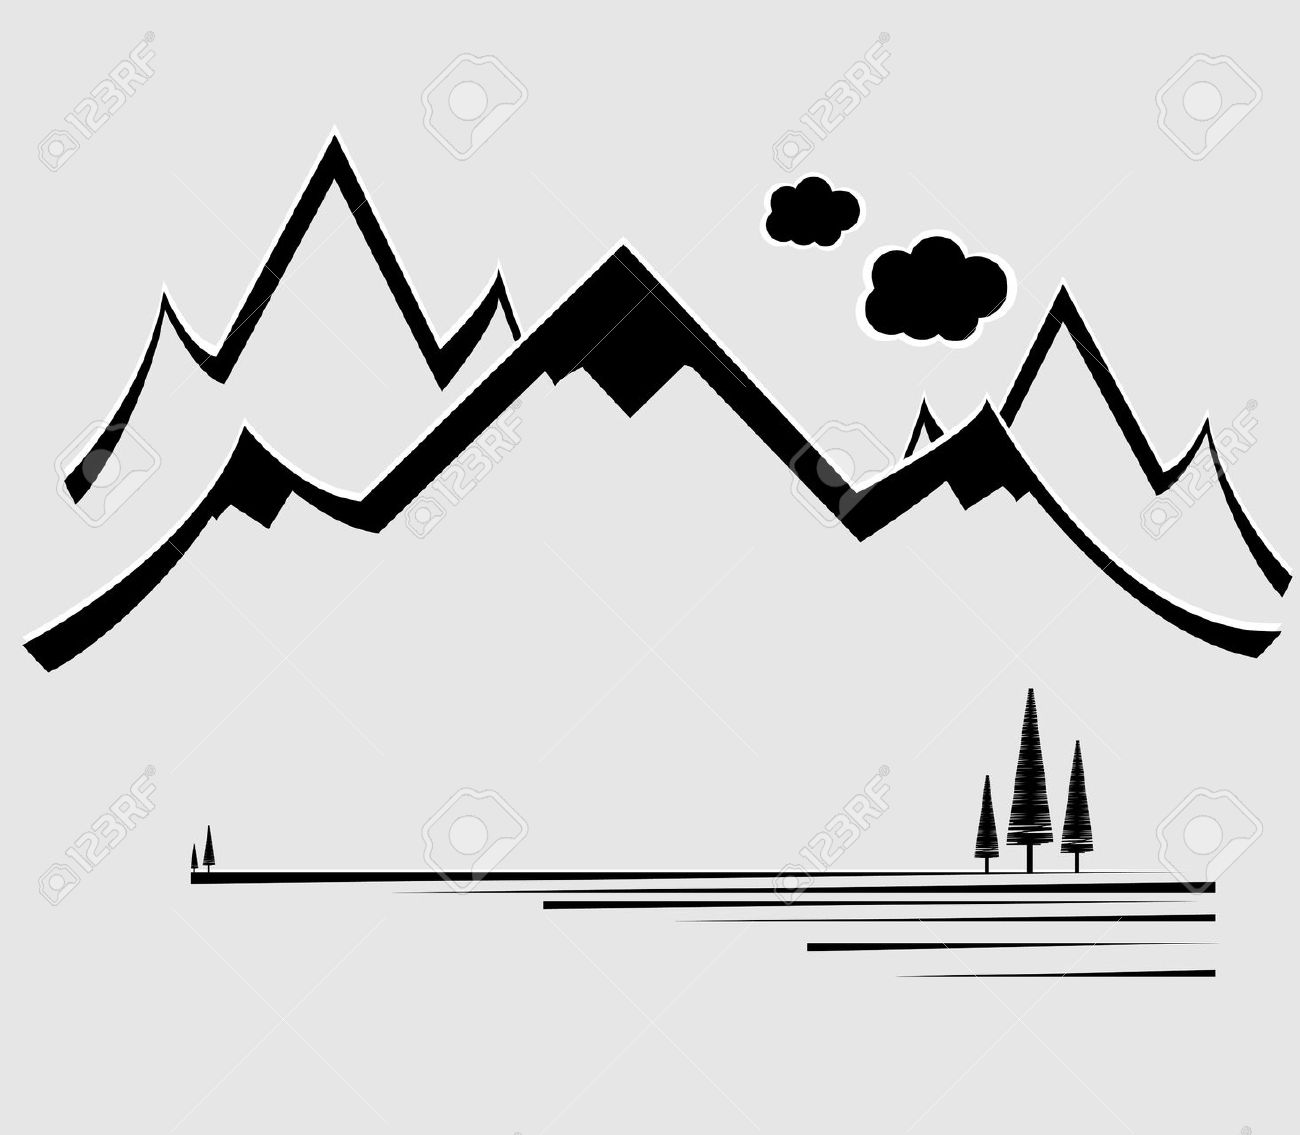 Mountain range with tree clipart silhouette 